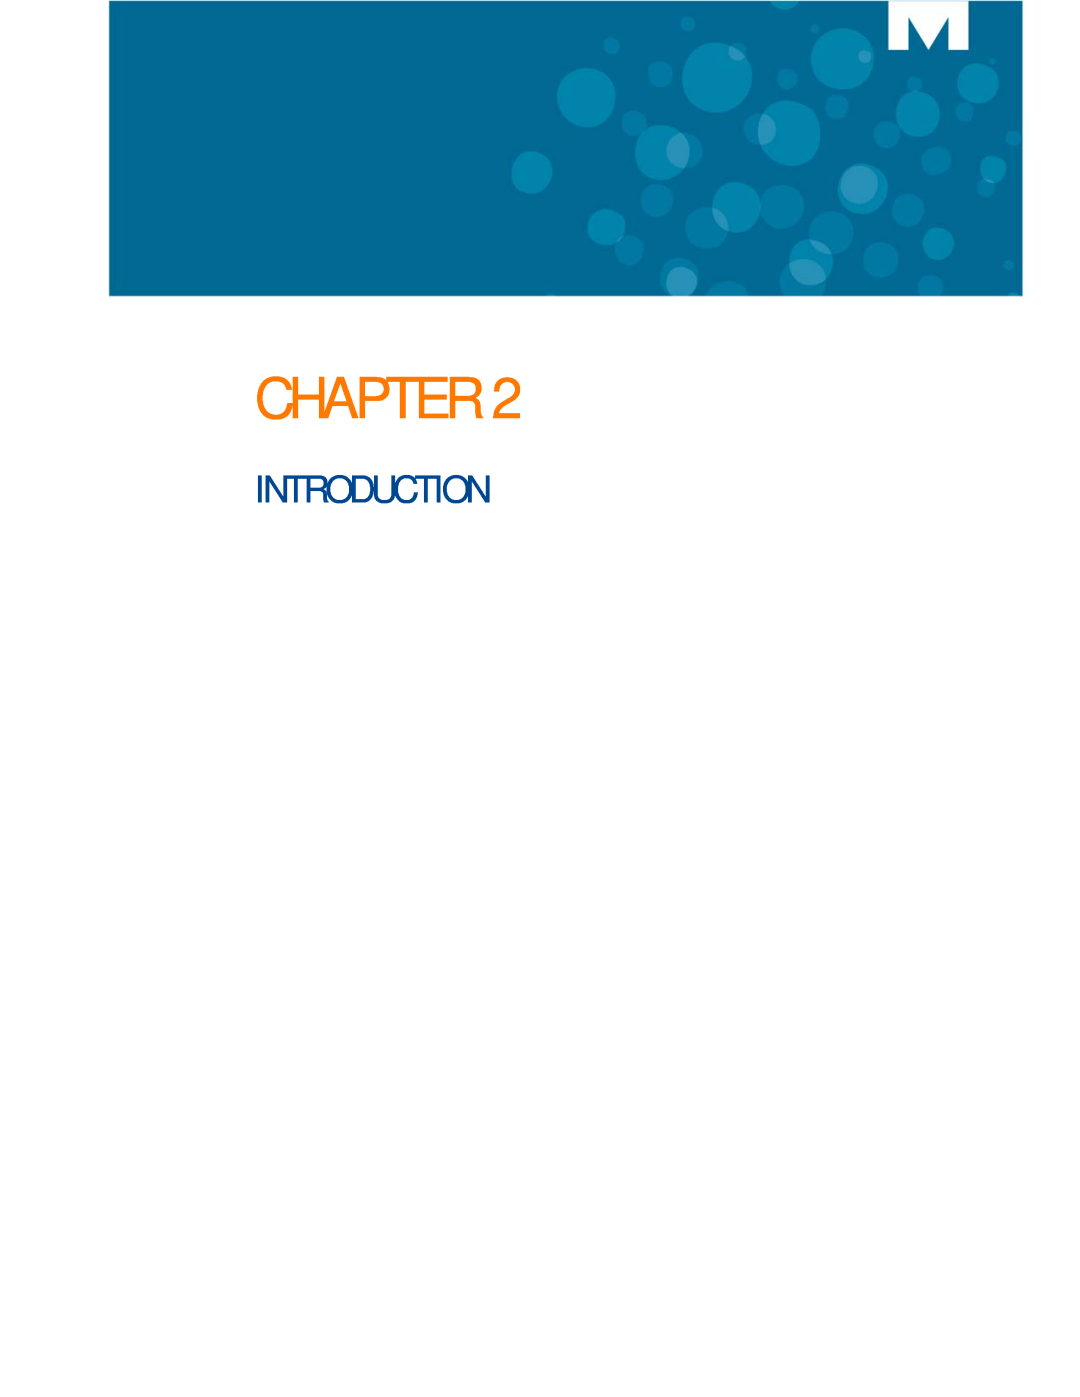 Mitel UC360 manual Introduction, Chapter 